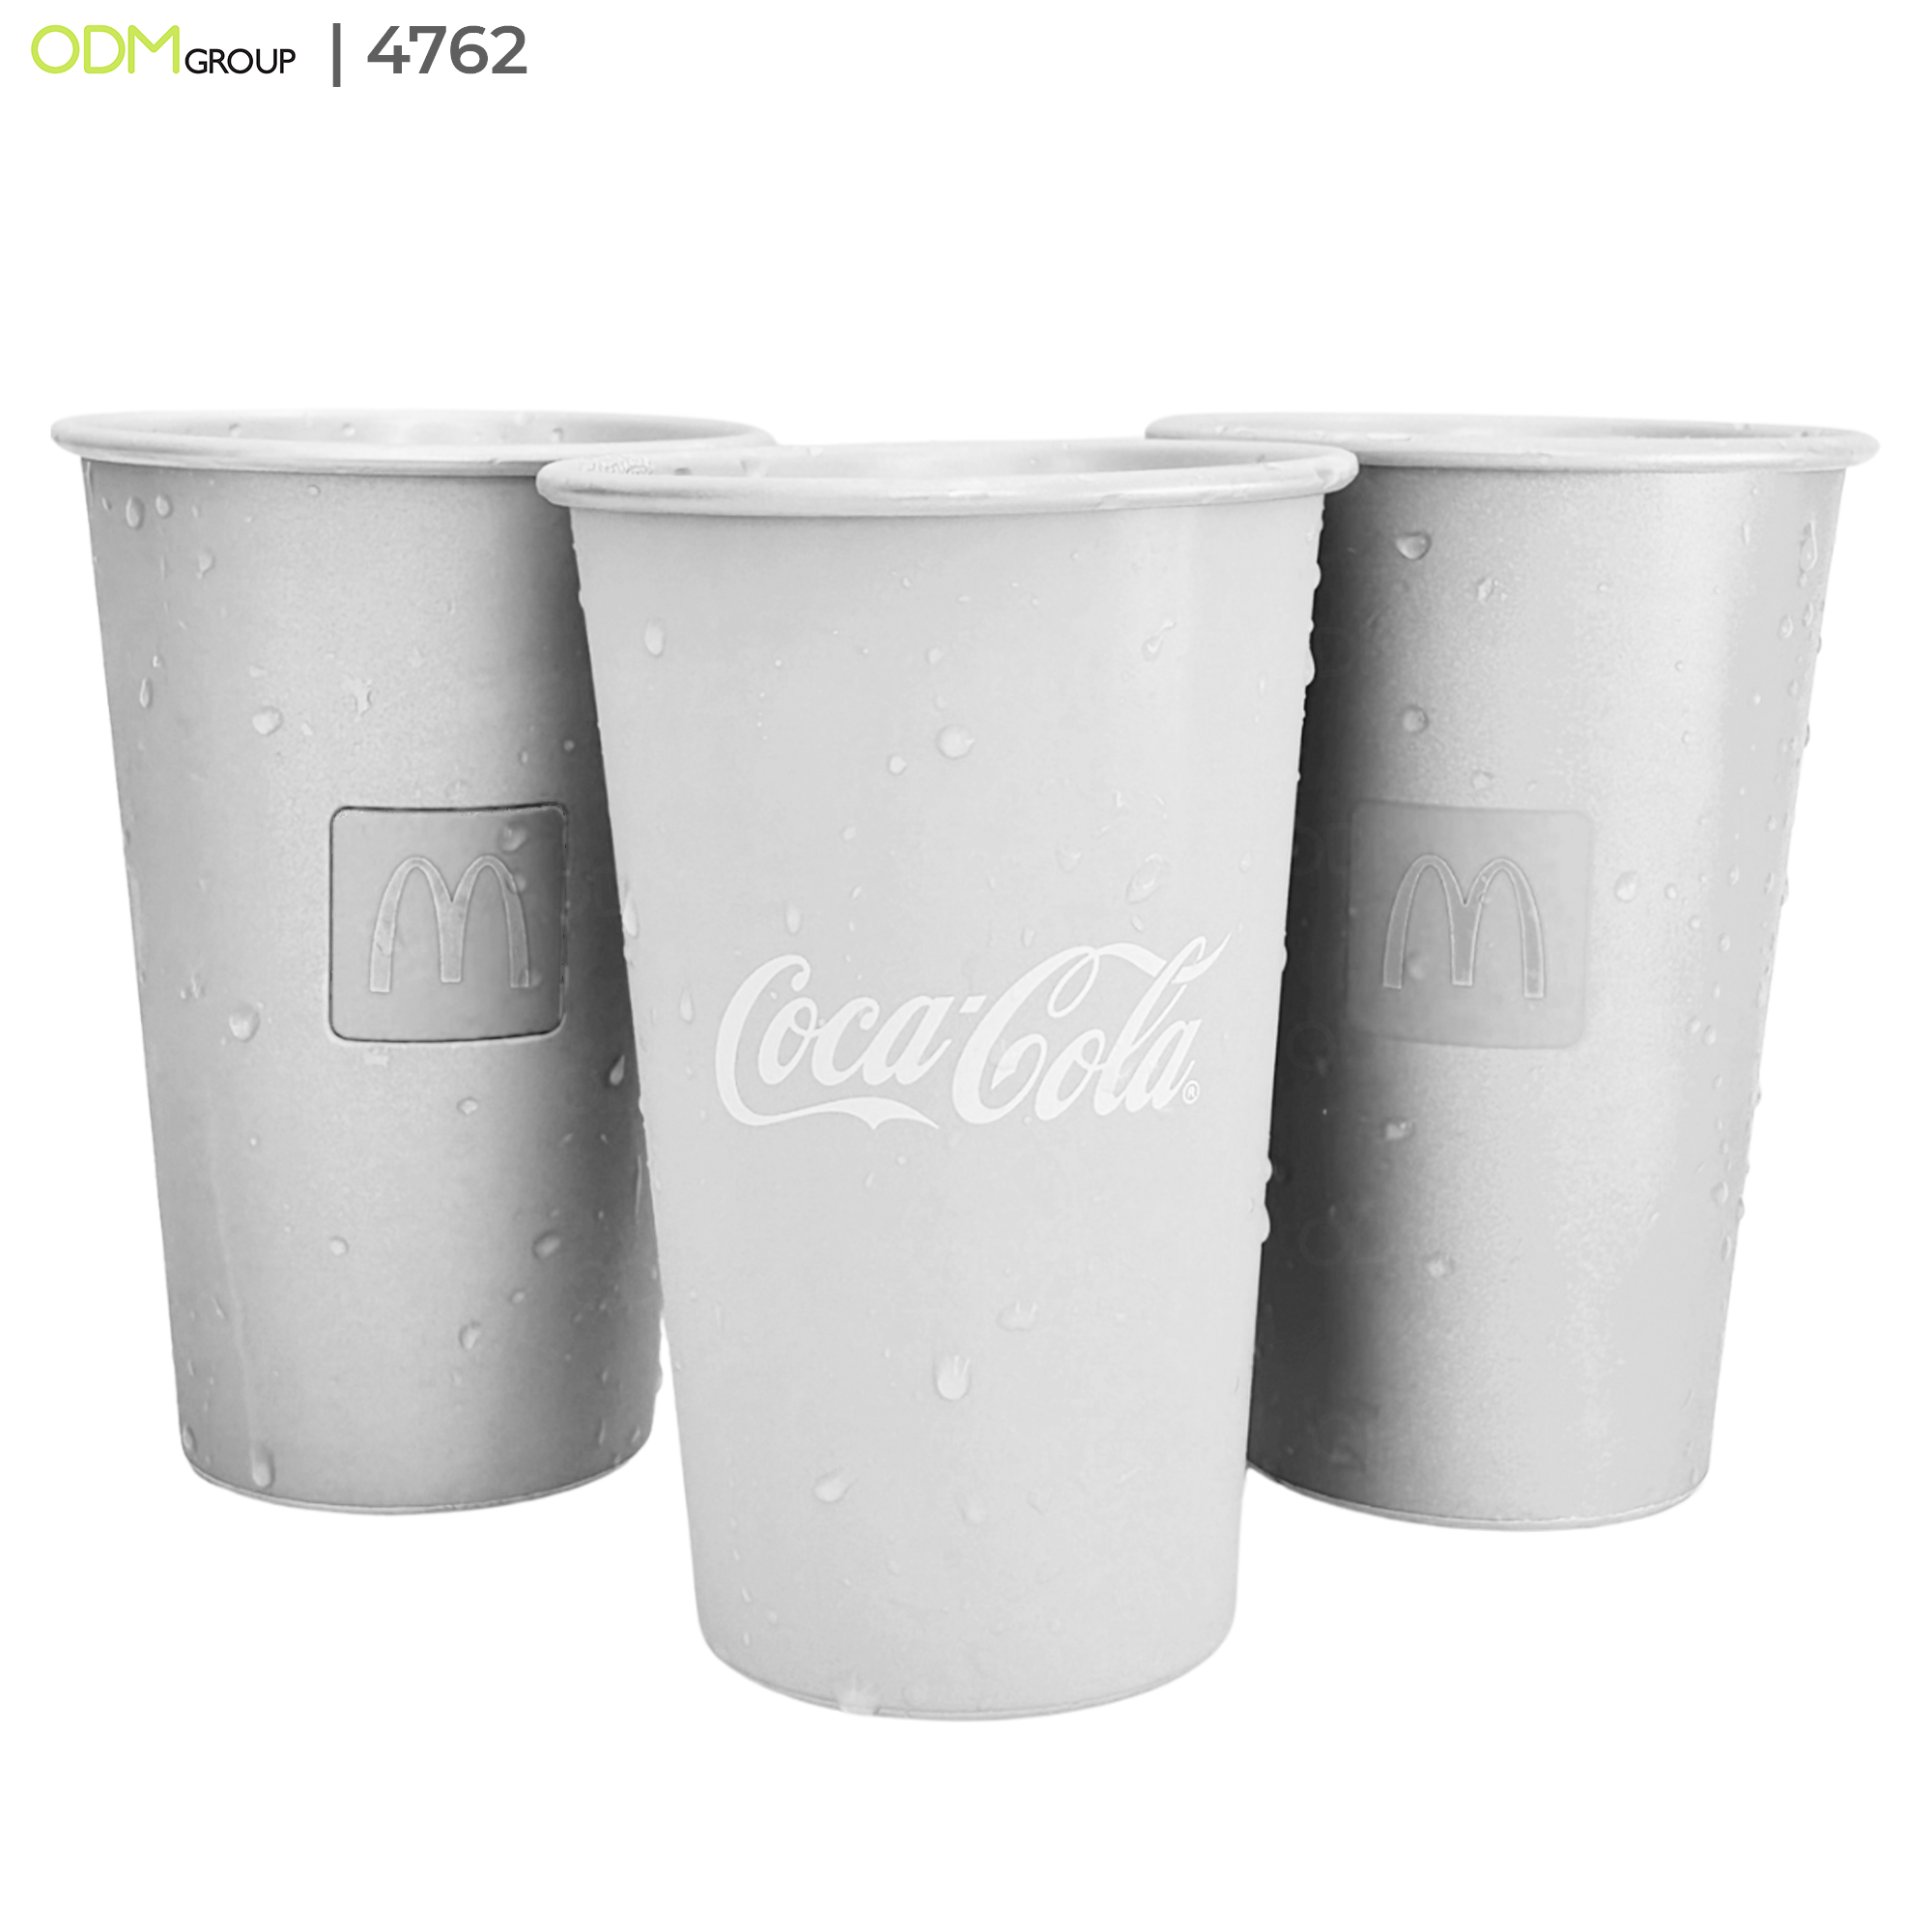 recyclable aluminum cups